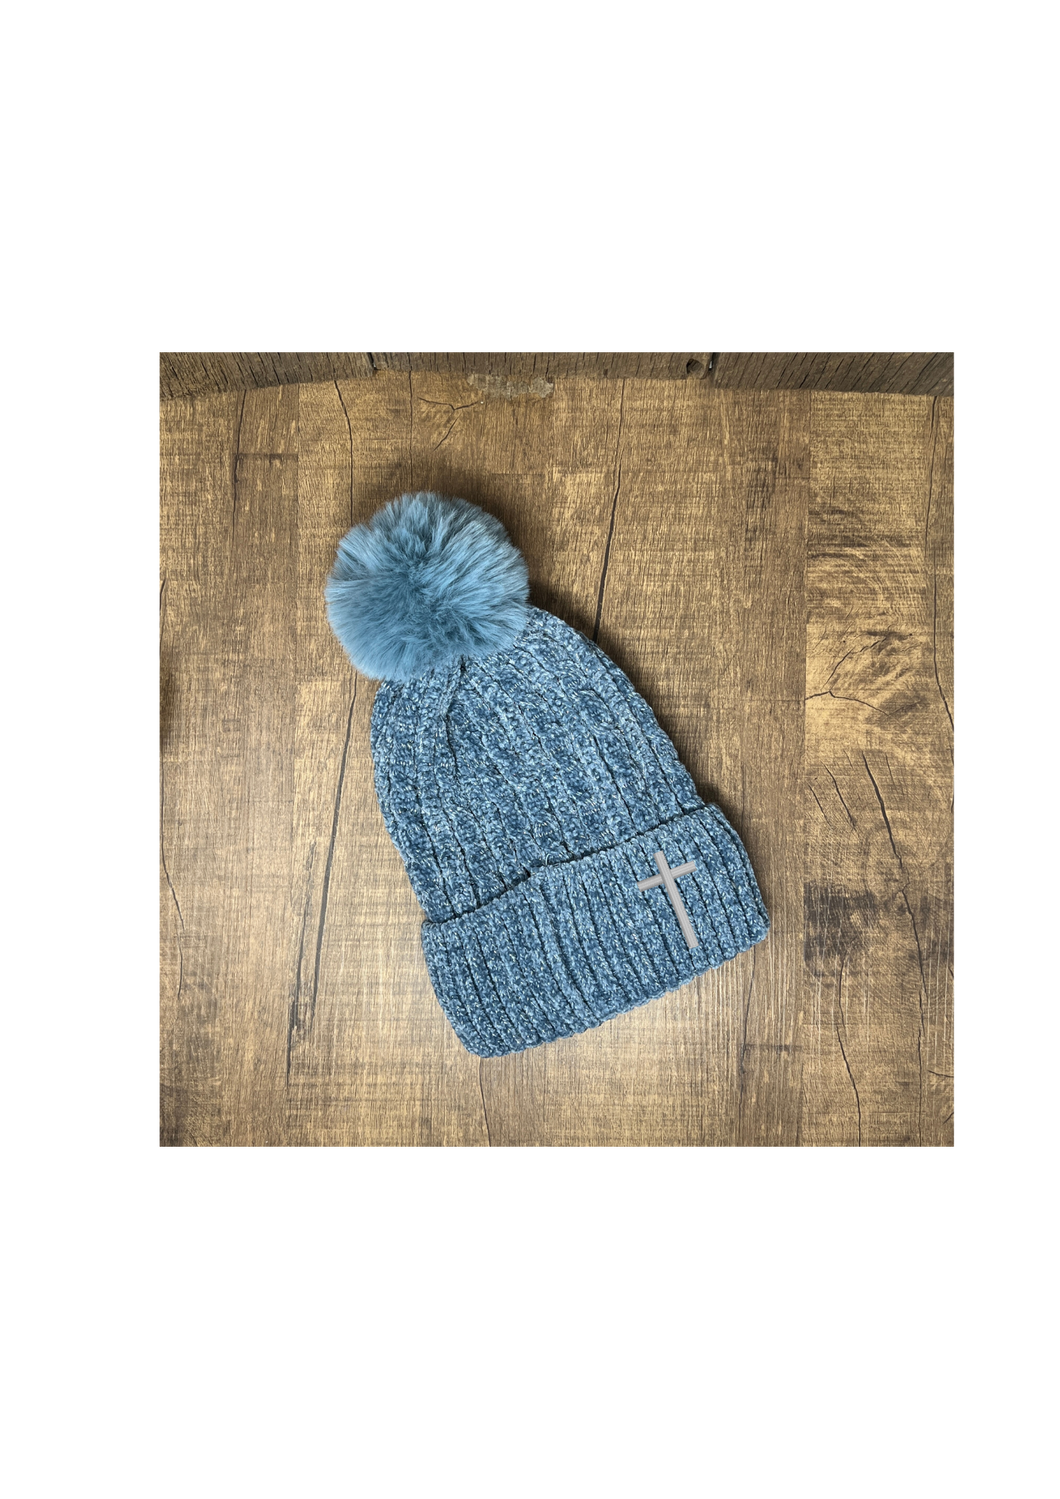 Toboggan - Blue Gray with embroidered cross, single puff ball